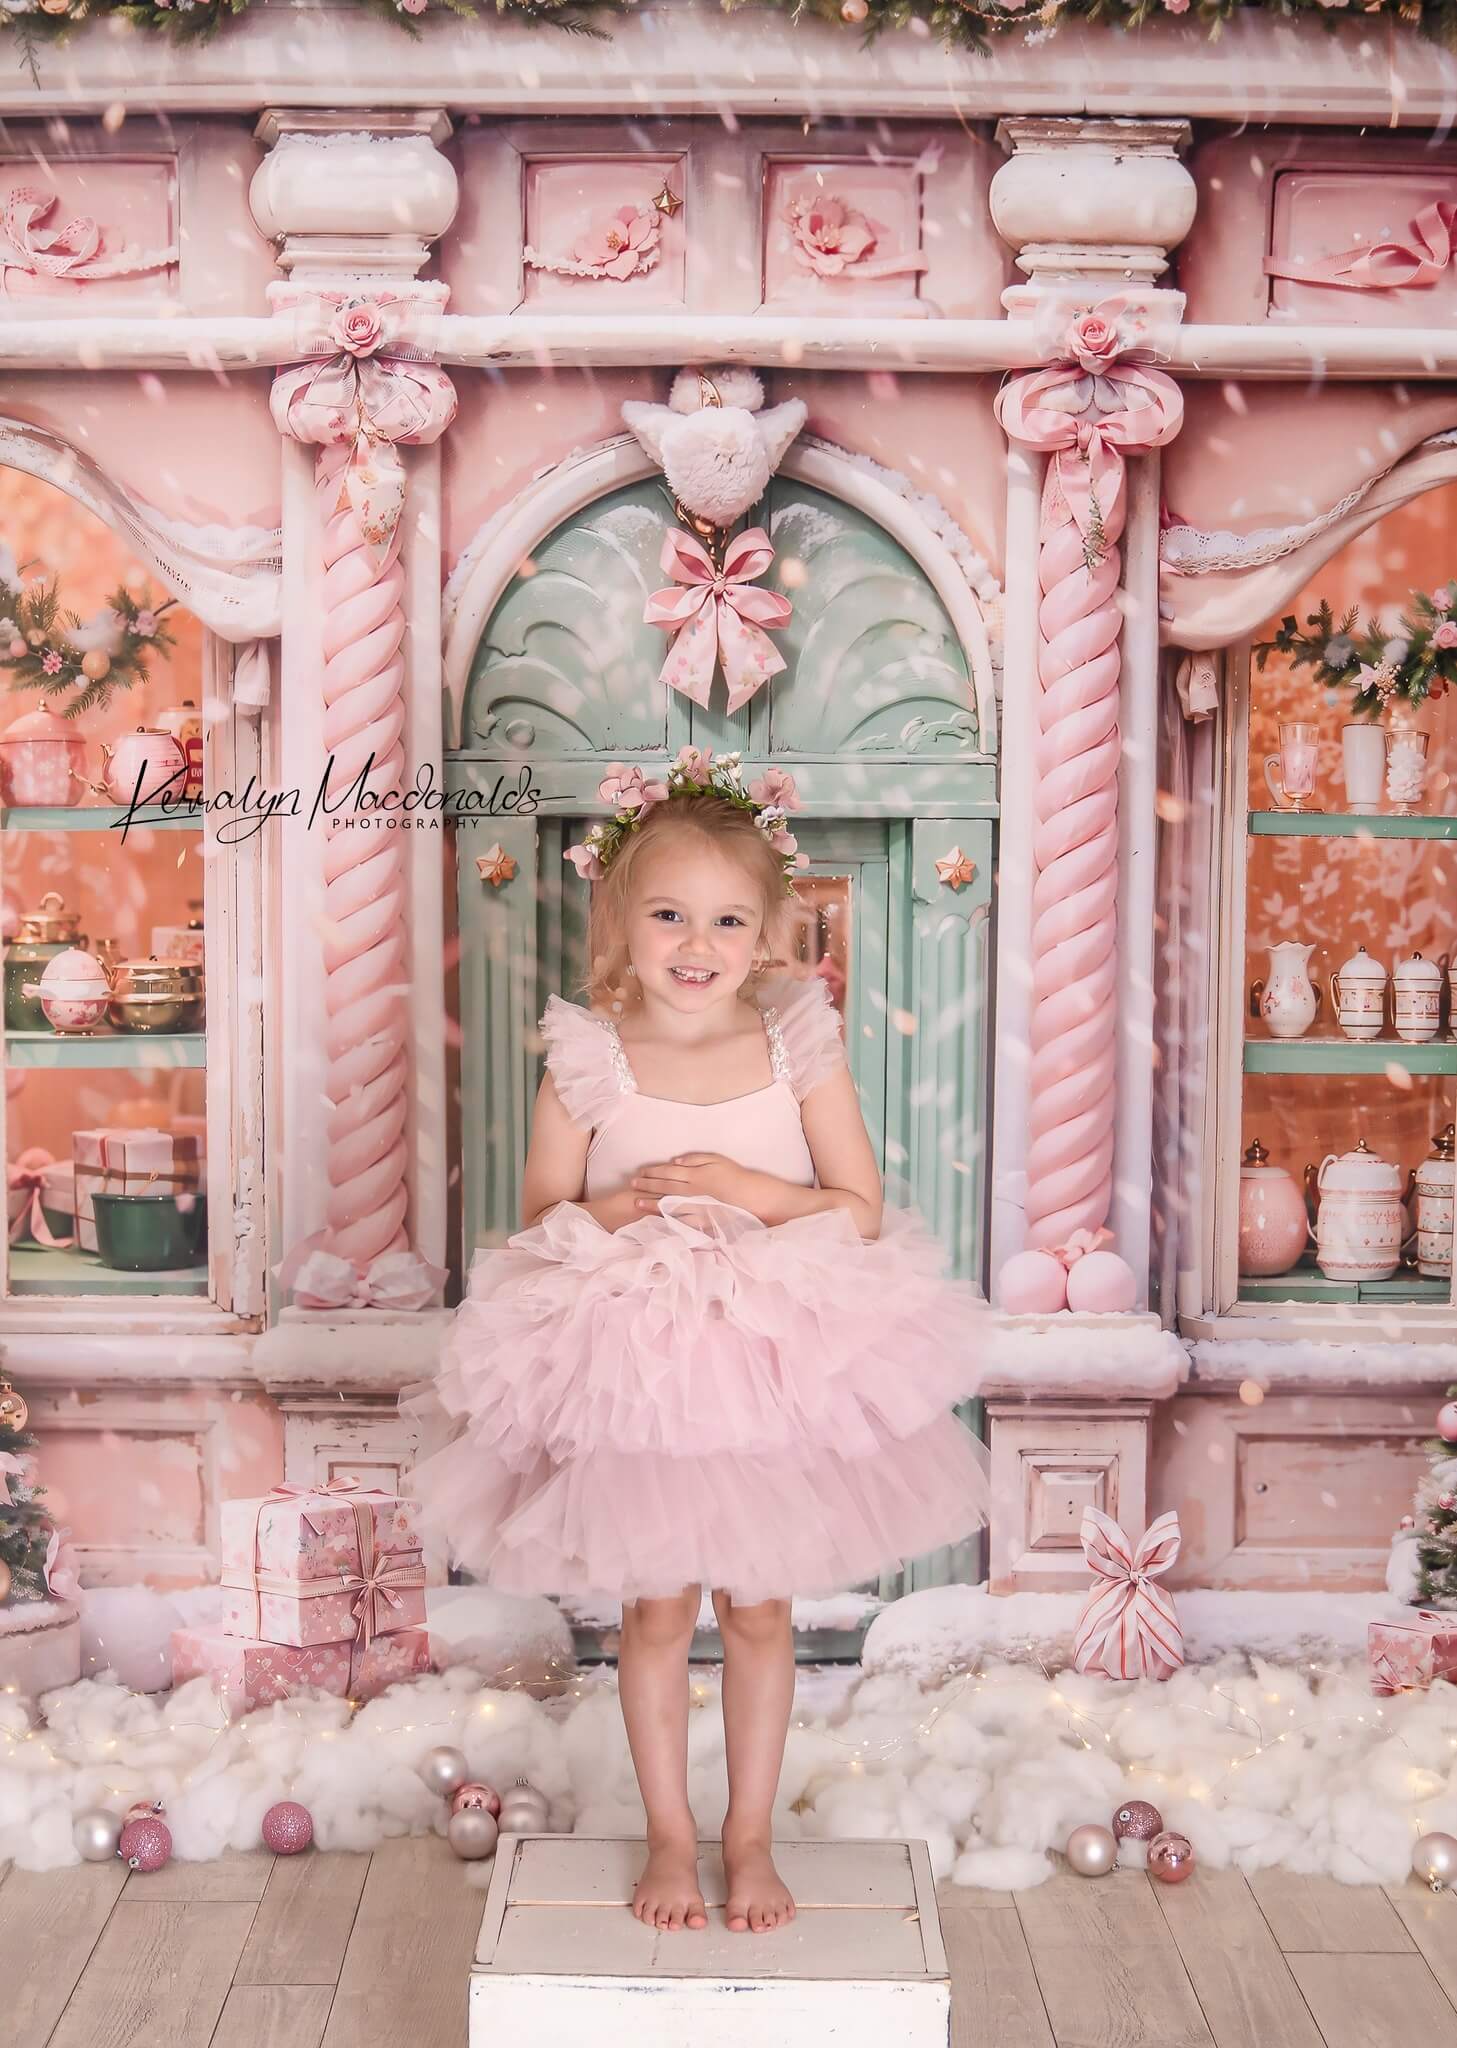 Kate Pink Snow Christmas Backdrop Designed by Chain Photography